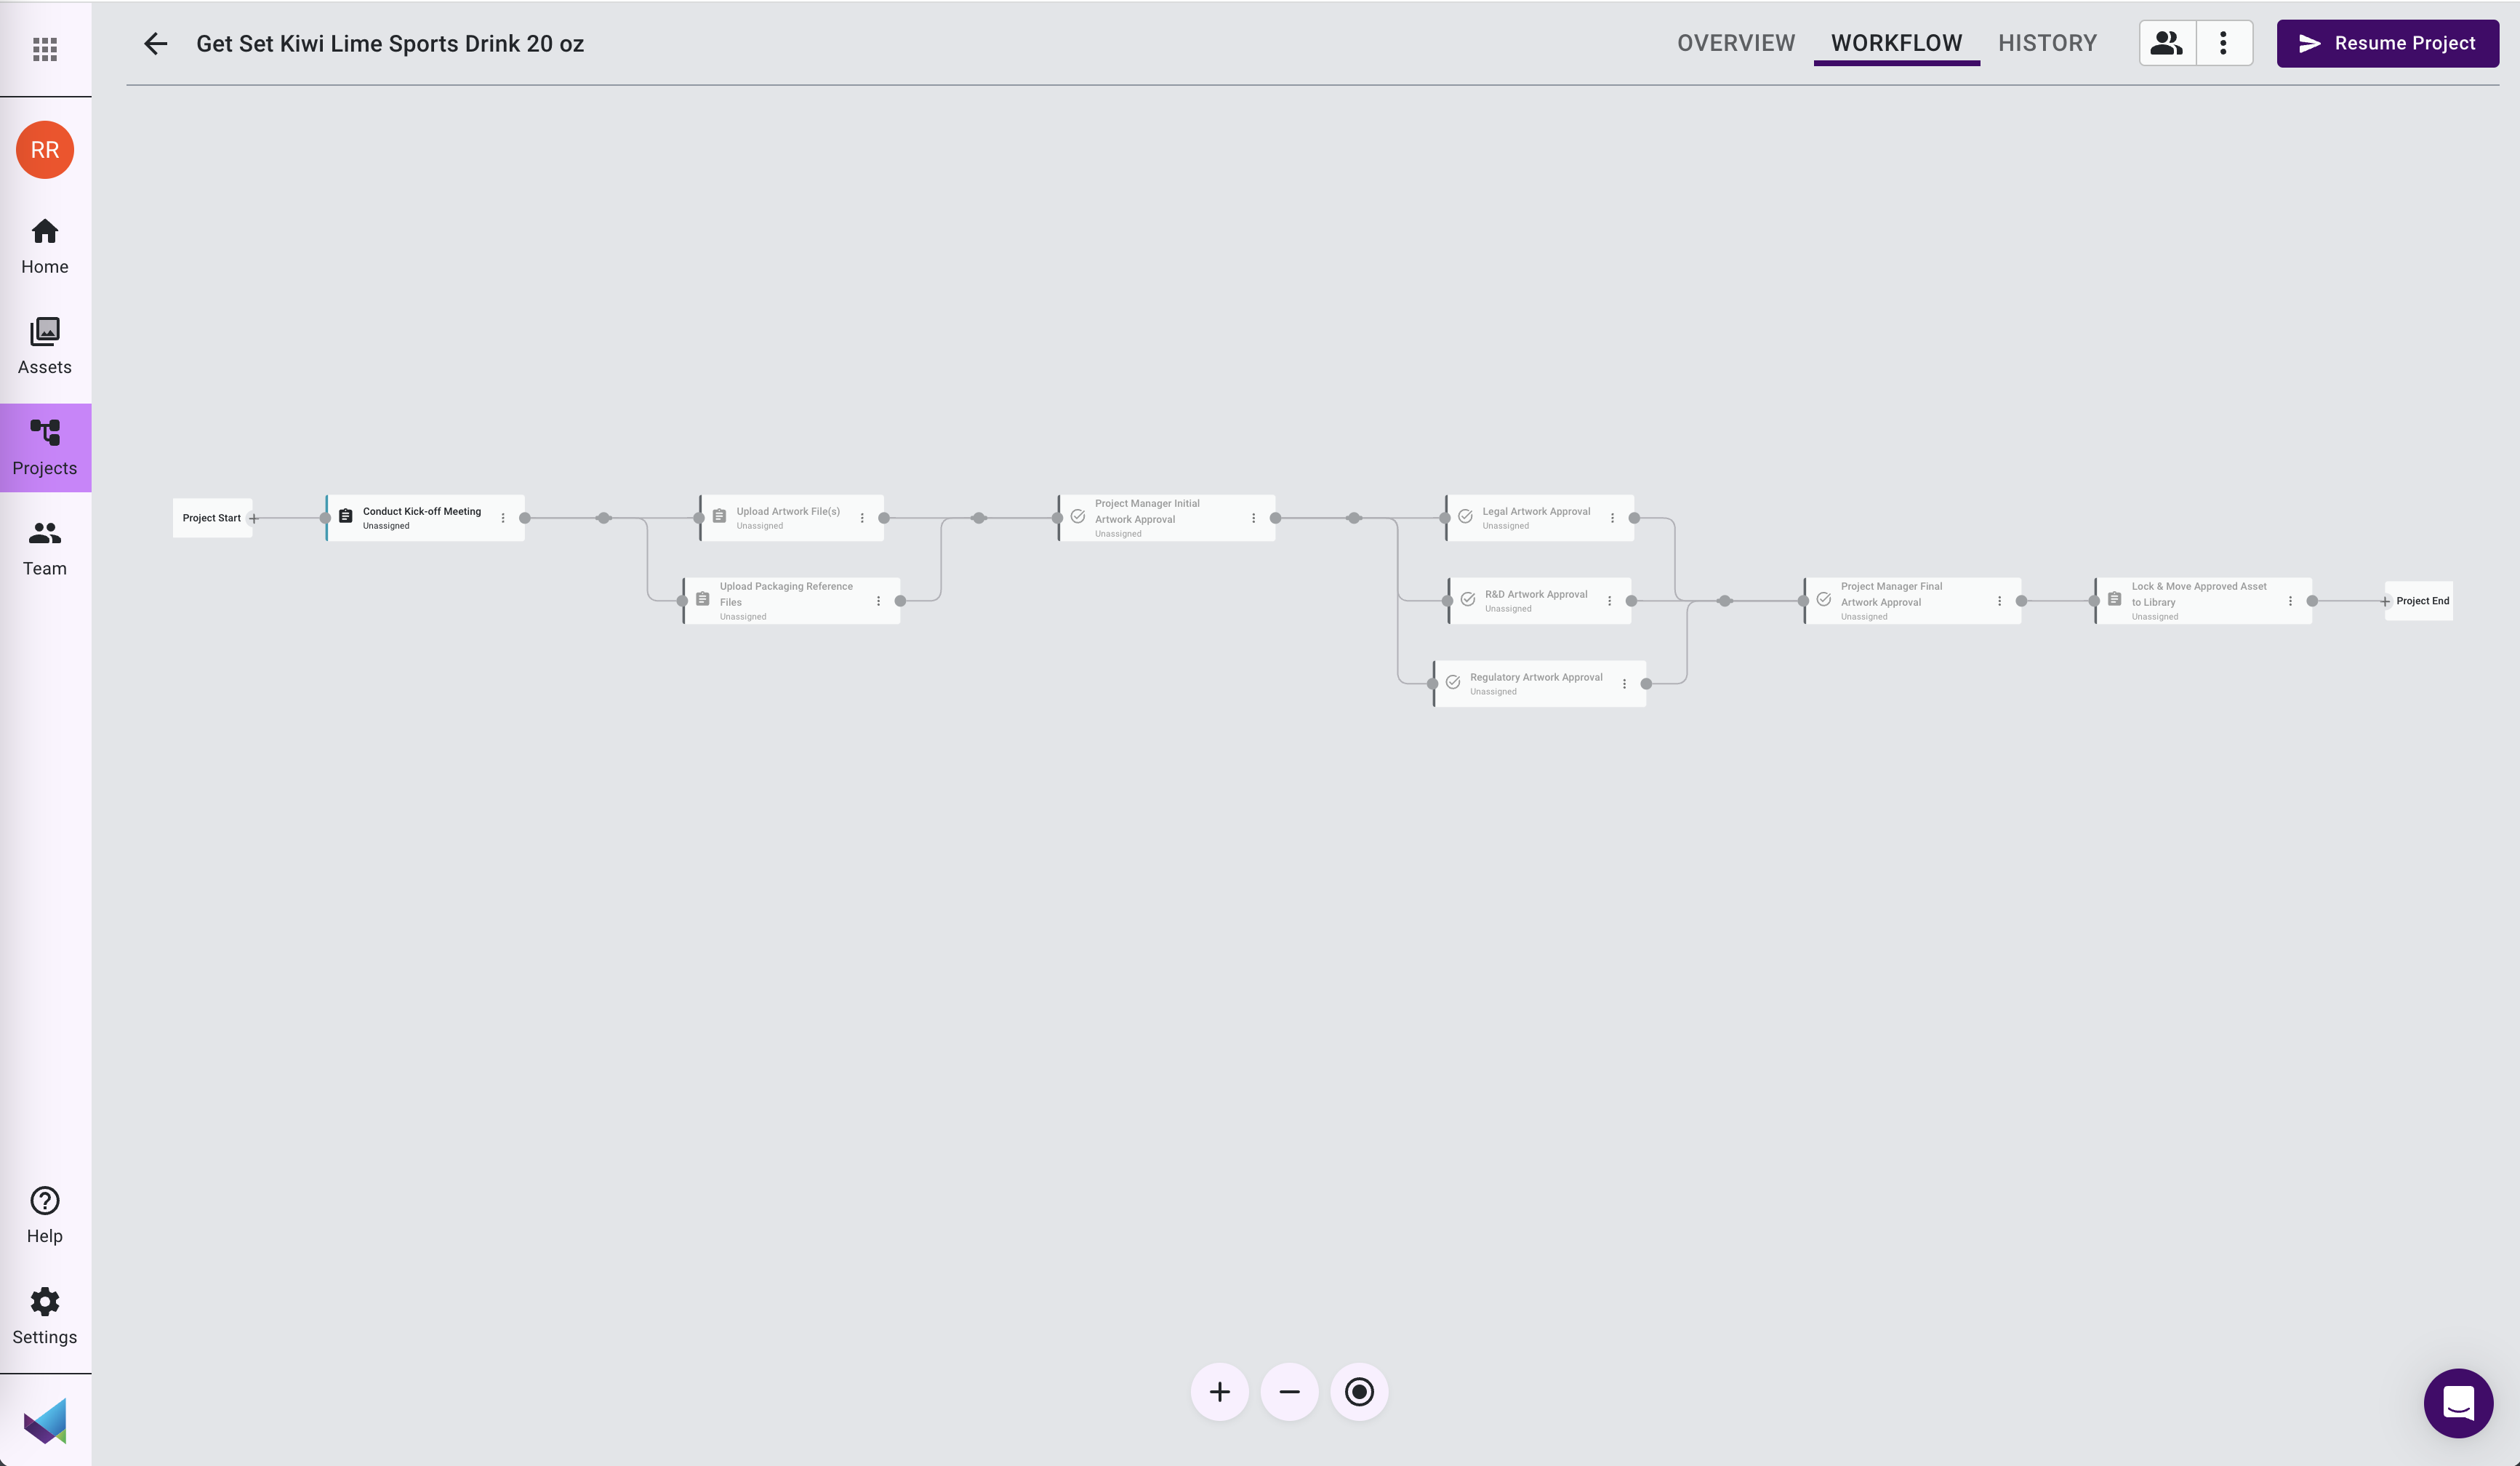 Image shows a custom workflow inside Mox